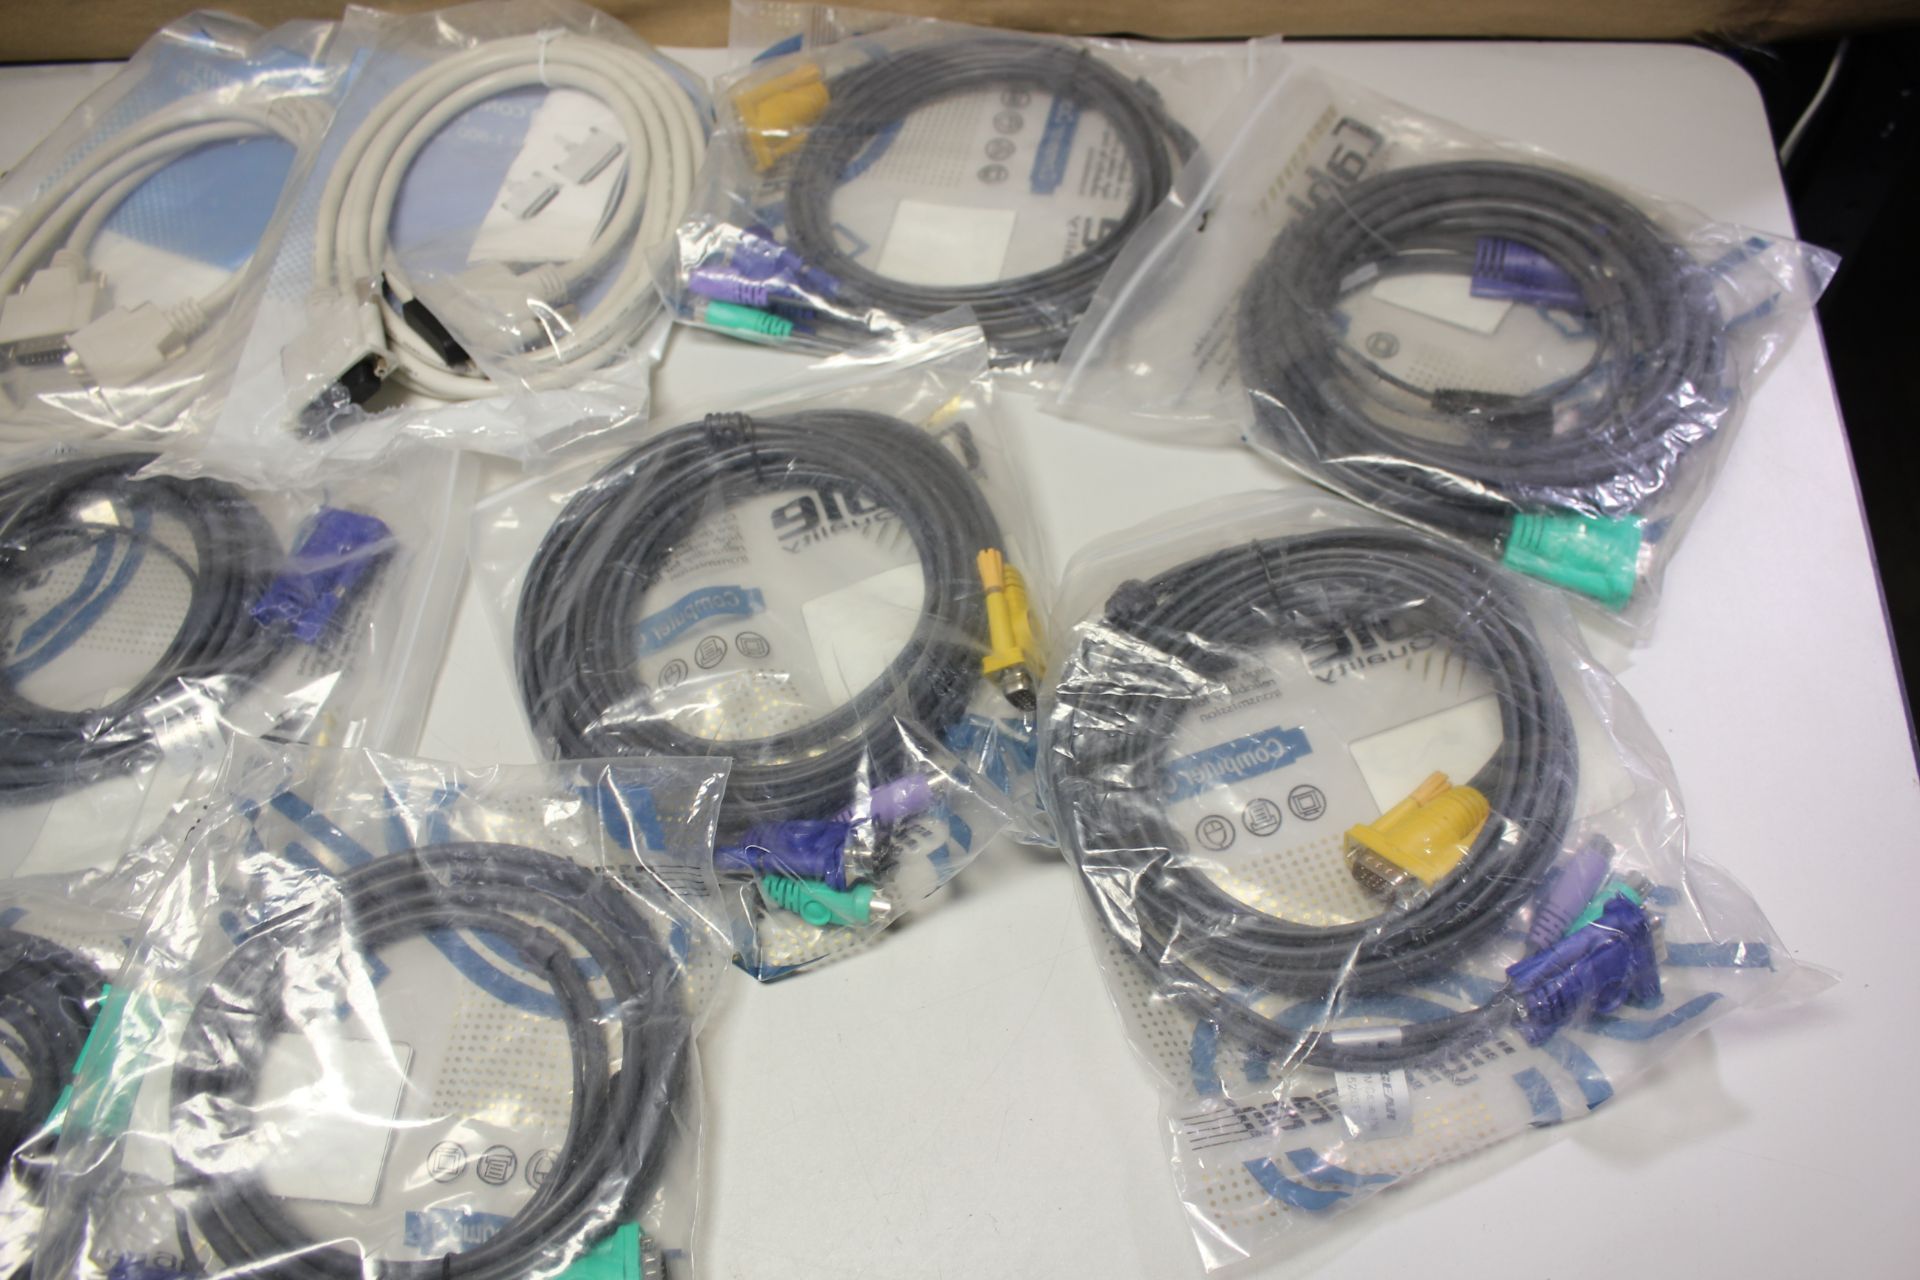 LOT OF NEW CABLES USB, KVM, PS2 - Image 10 of 11